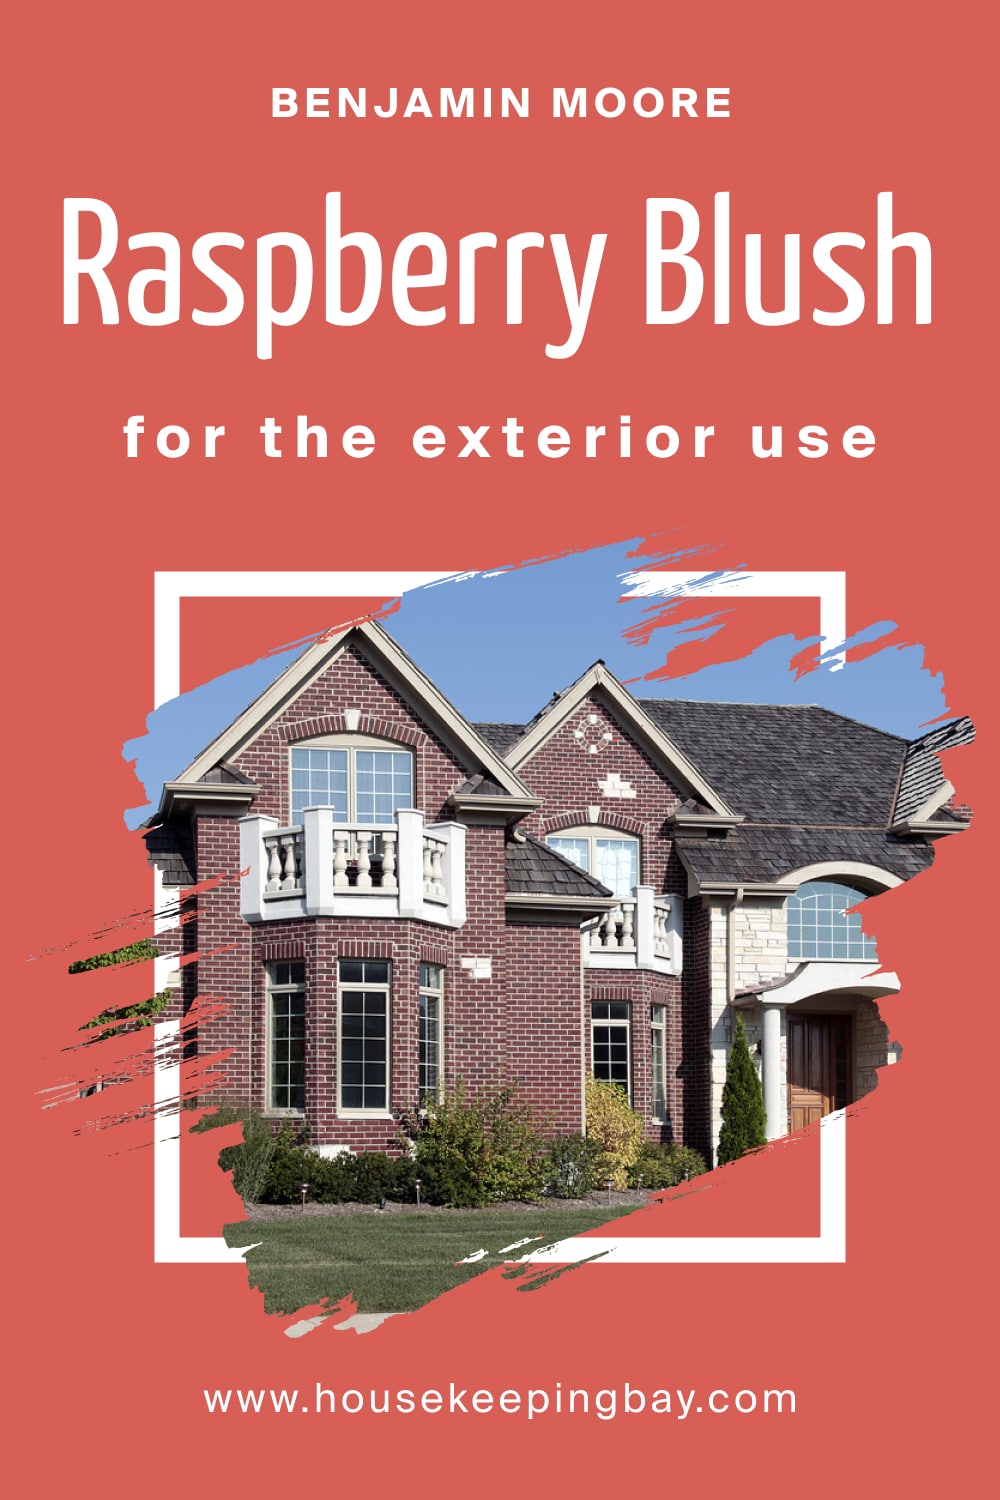 Benjamin Moore. Raspberry Blush 2008 30 for the Exterior Use